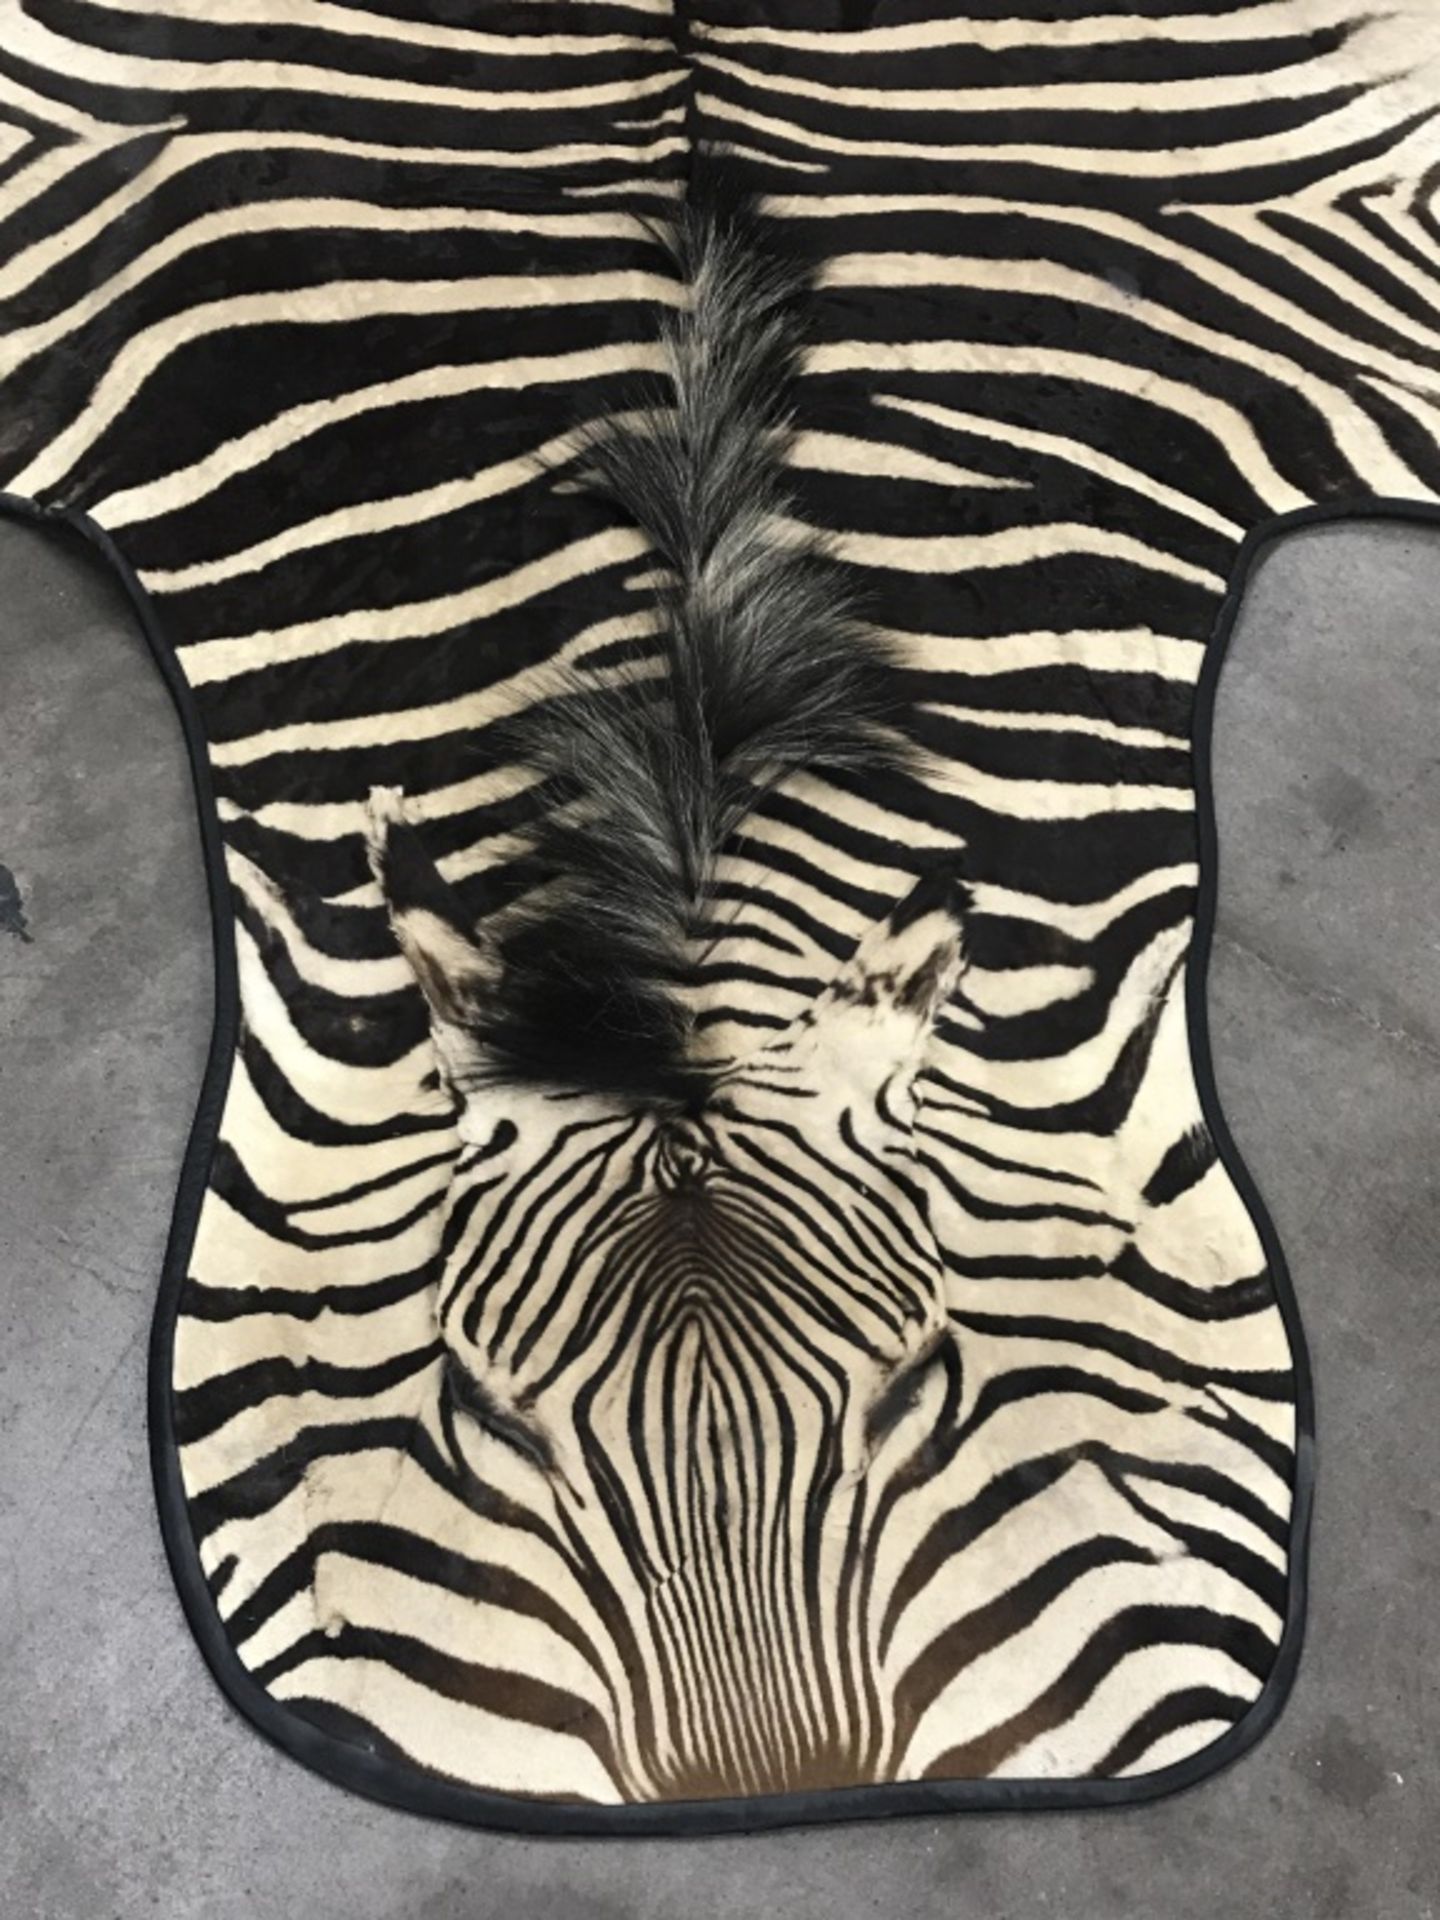 Very Nice Zebra Rug (TX Res. Only) - Image 5 of 13